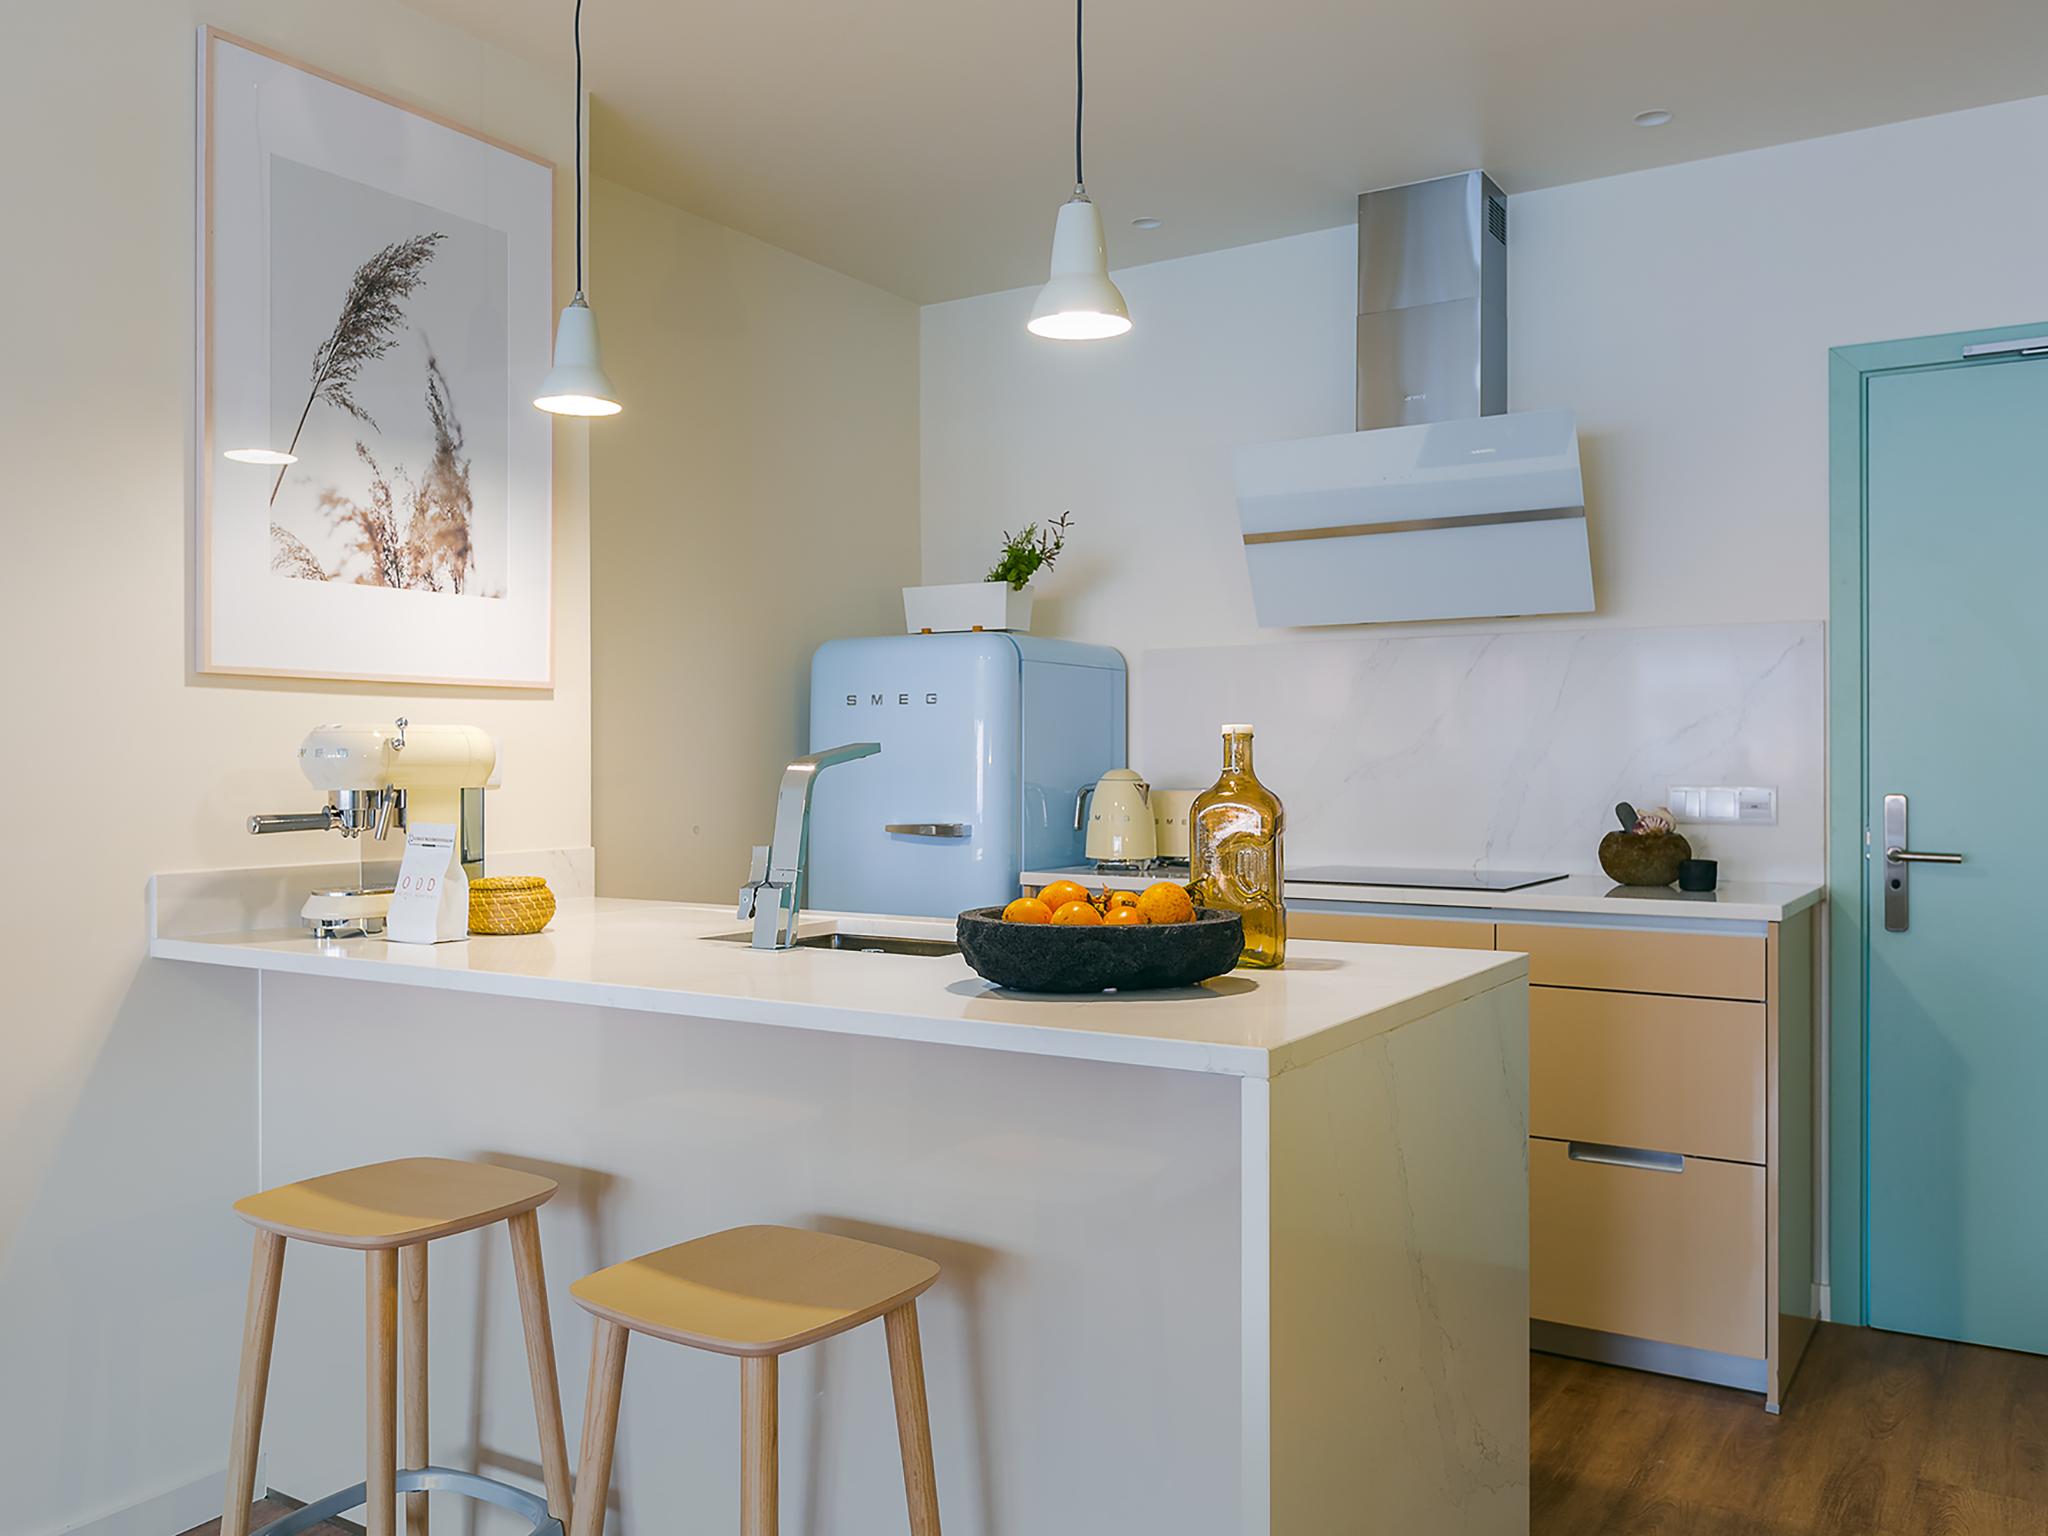 Choose between studios and two-bedroom apartments with a fully-equipped kitchen